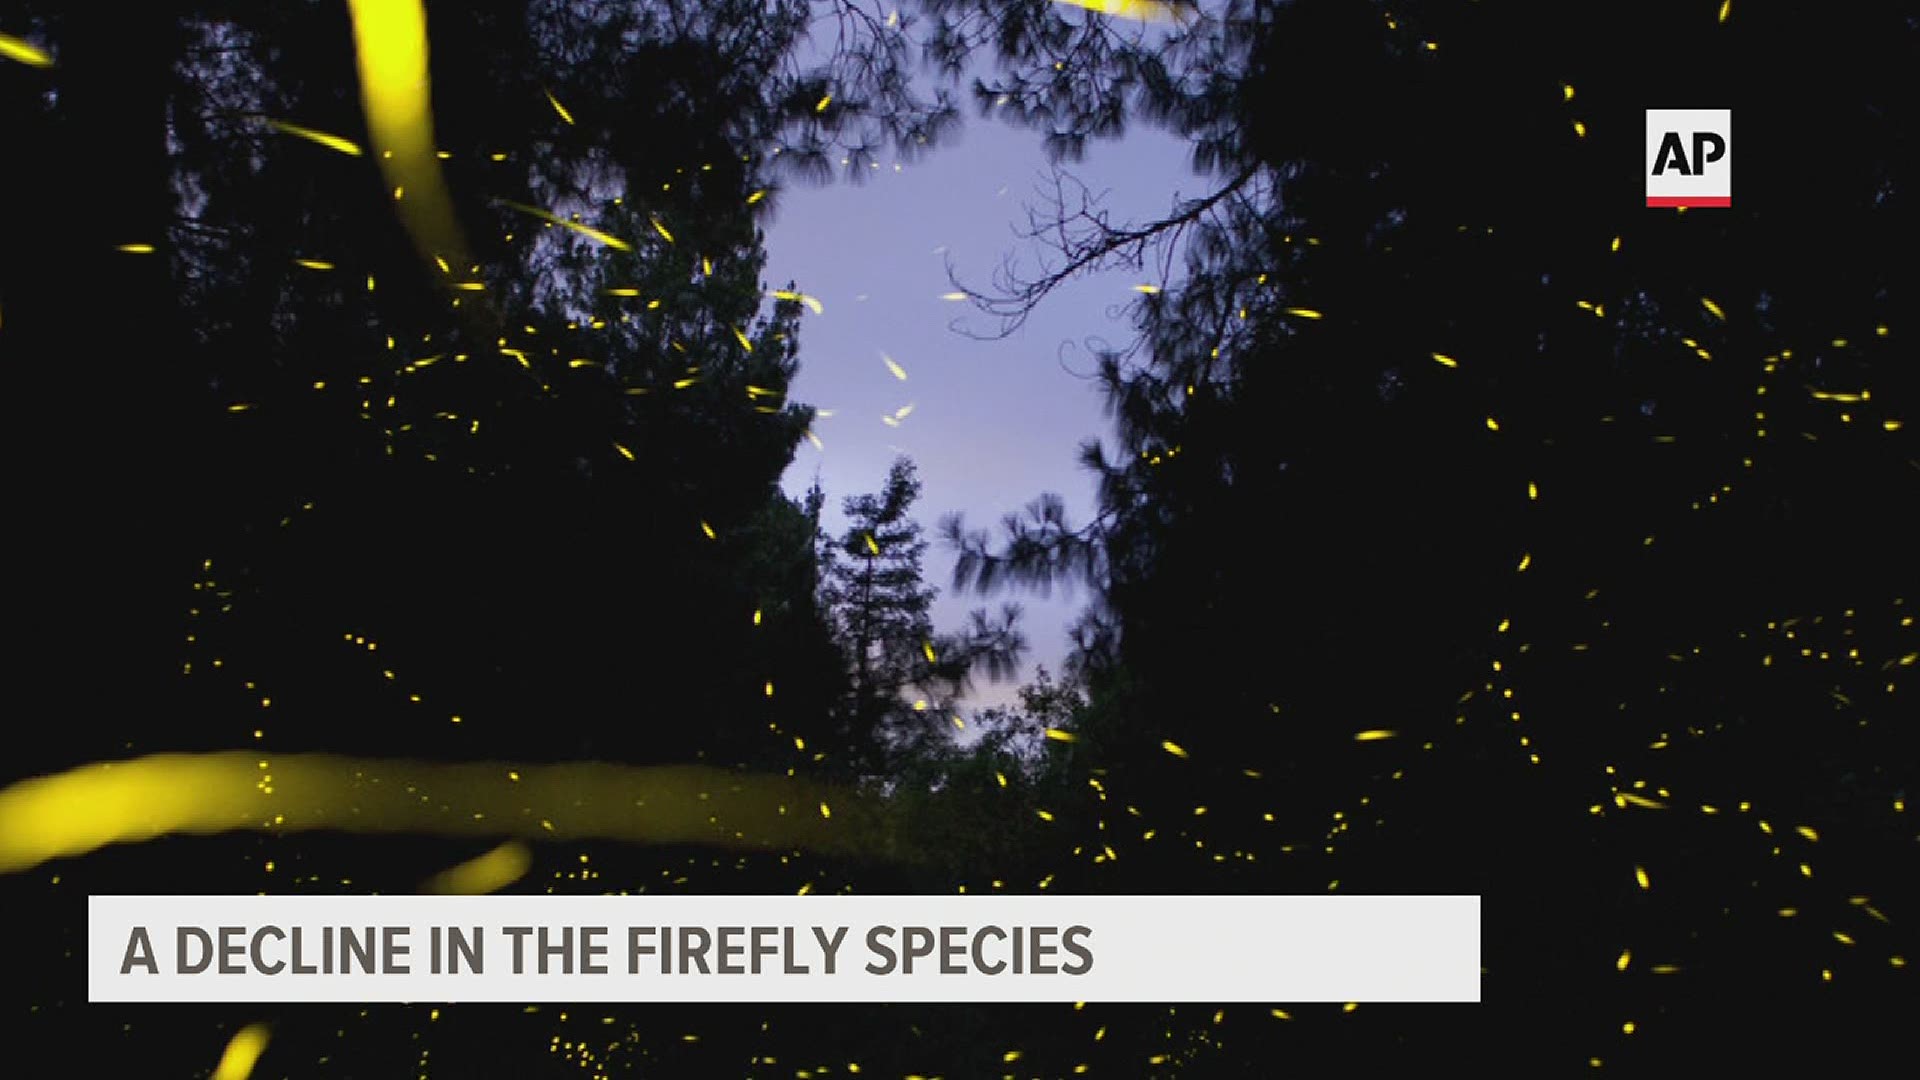 Entomologists say the decline in various insects is causing a ripple effect